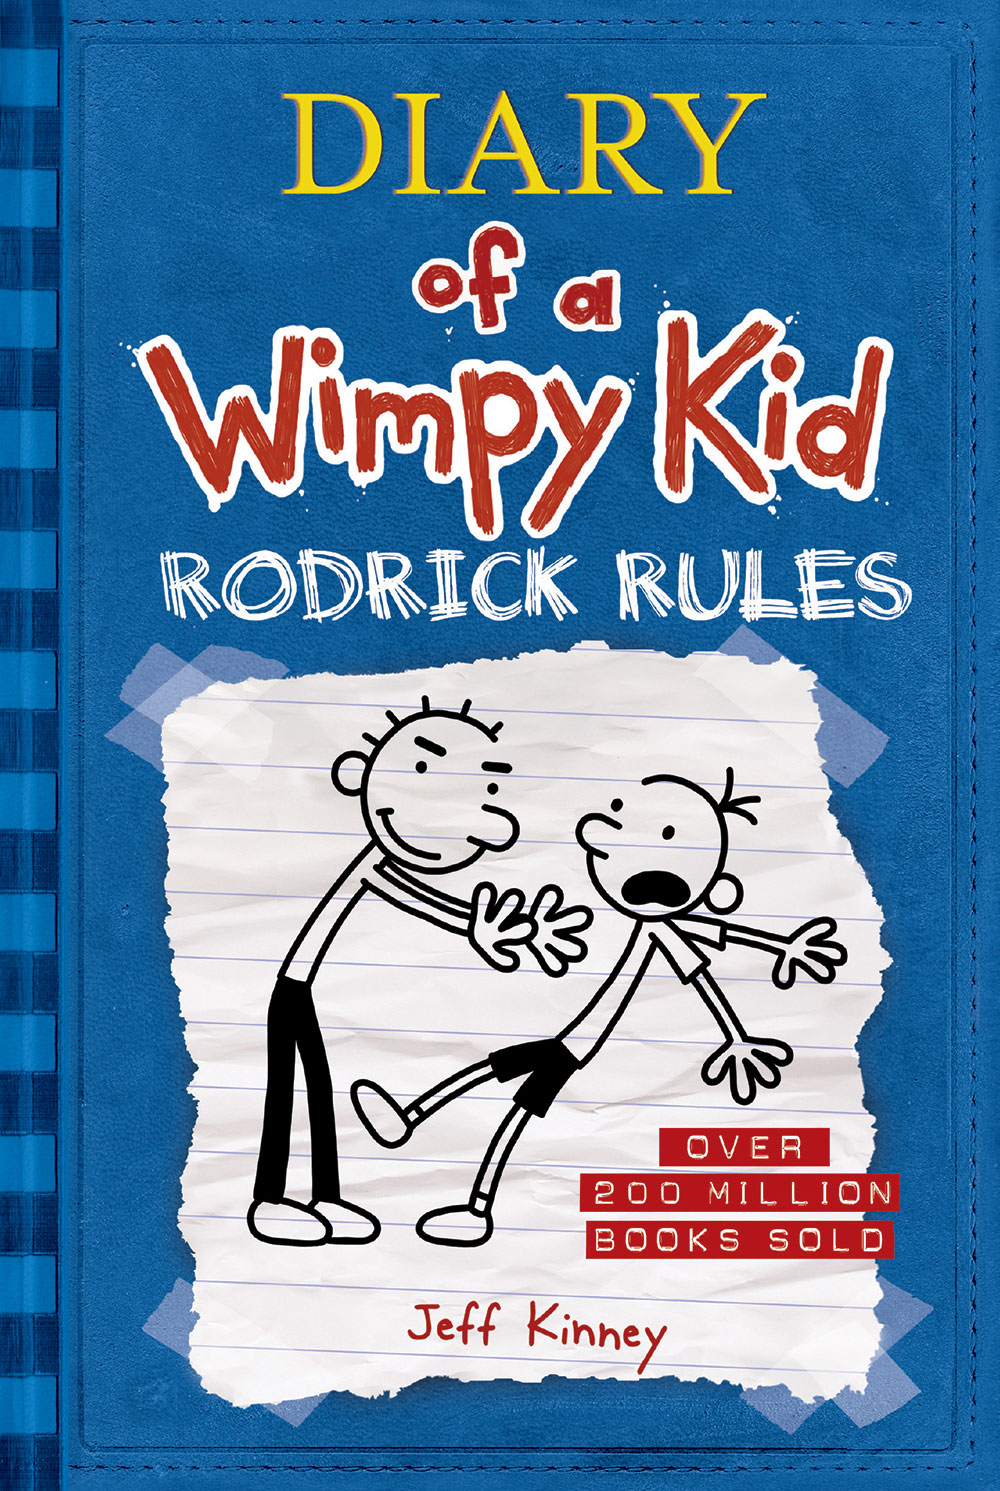 Diary of a Wimpy Kid T.02 - Rodrick Rules | 9-12 years old